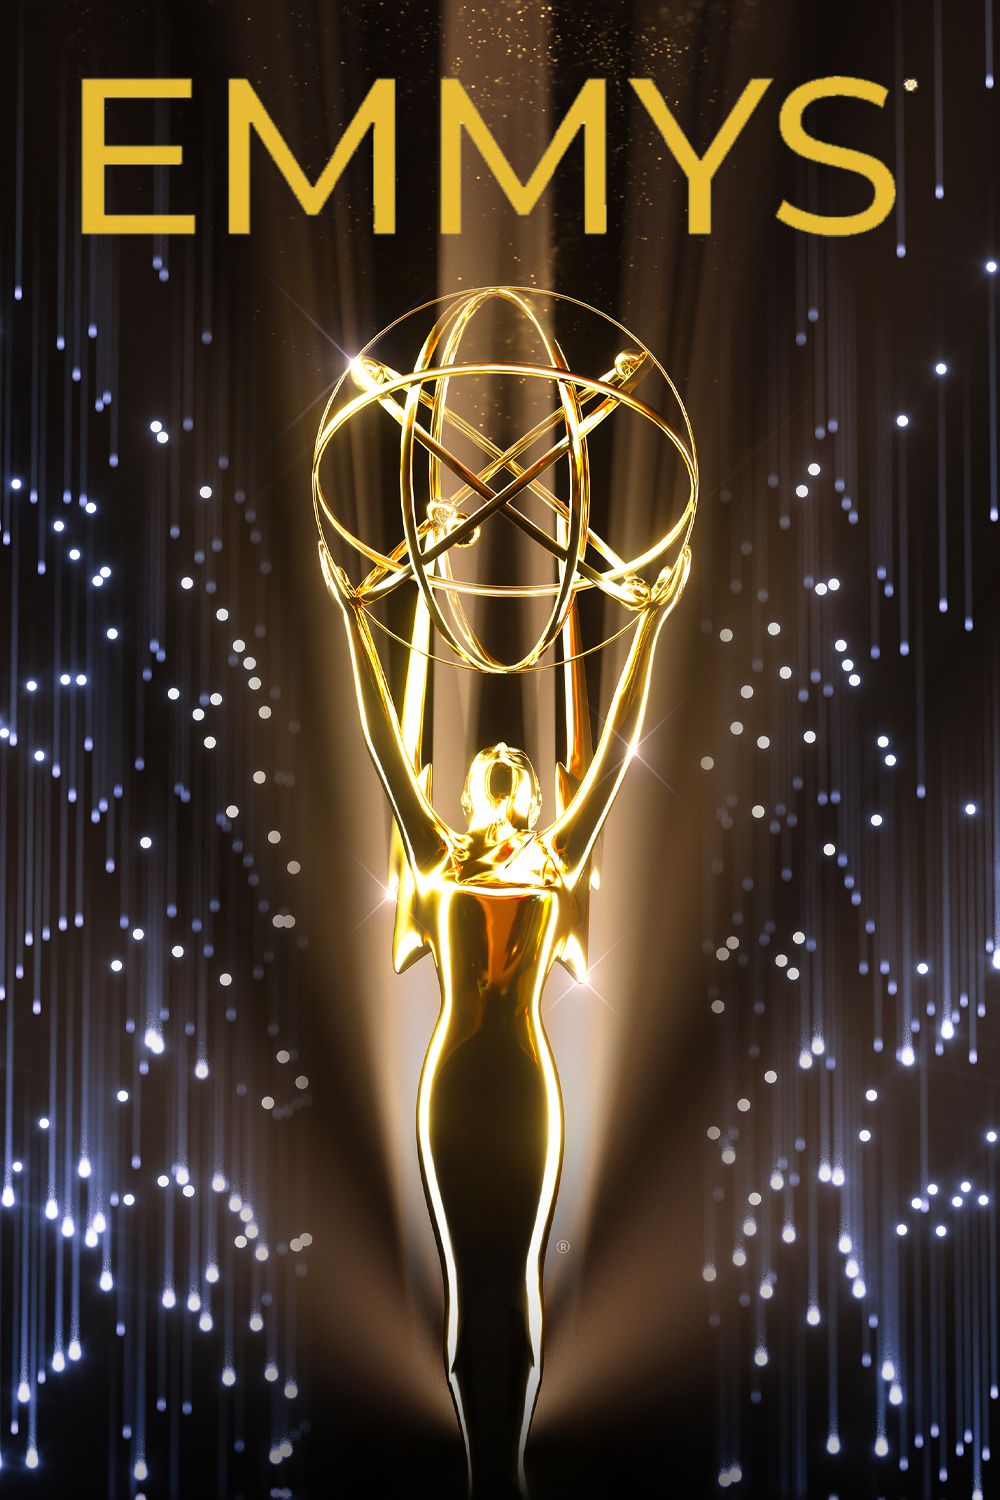 Emmy Awards Poster Featuring an Emmy Award Statue in Front of Sparkling Lights